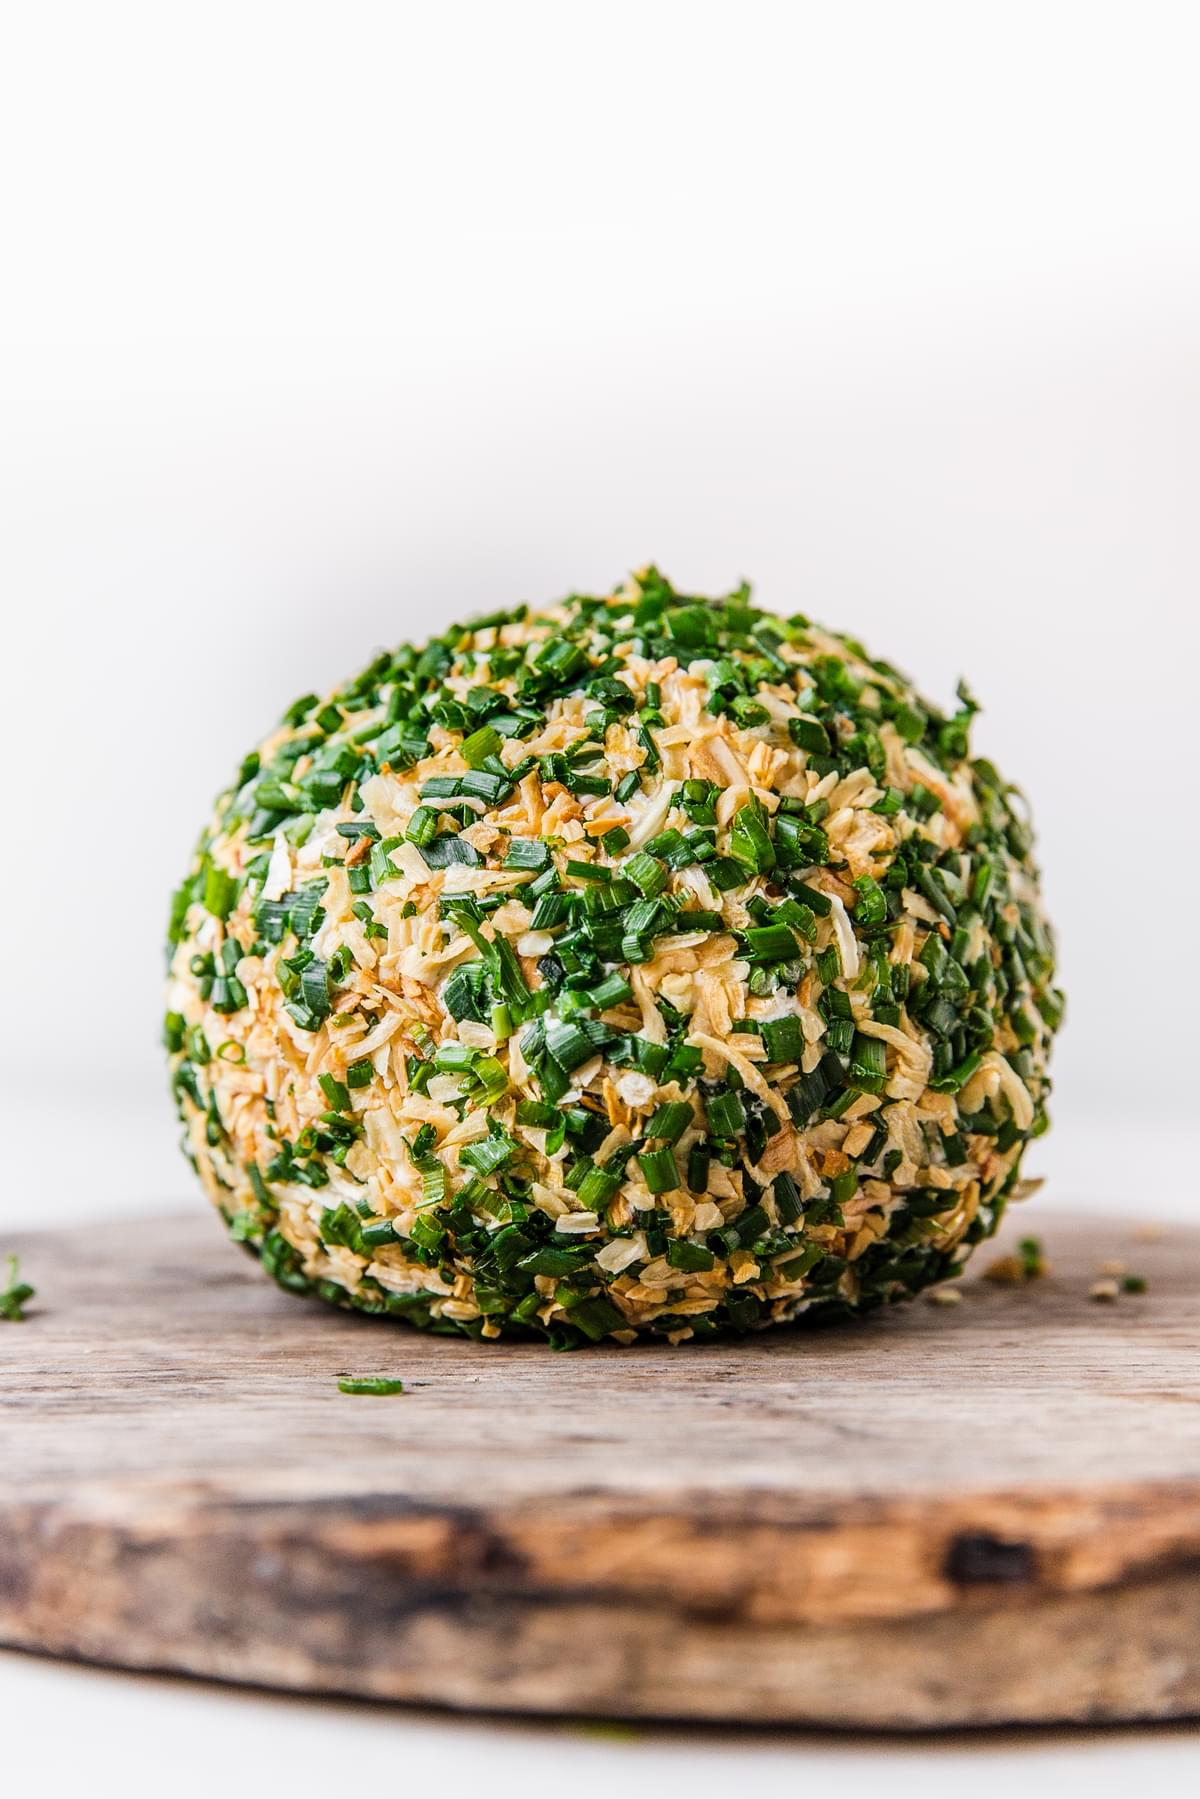 Cheddar And Onion Cheeseball on a plate